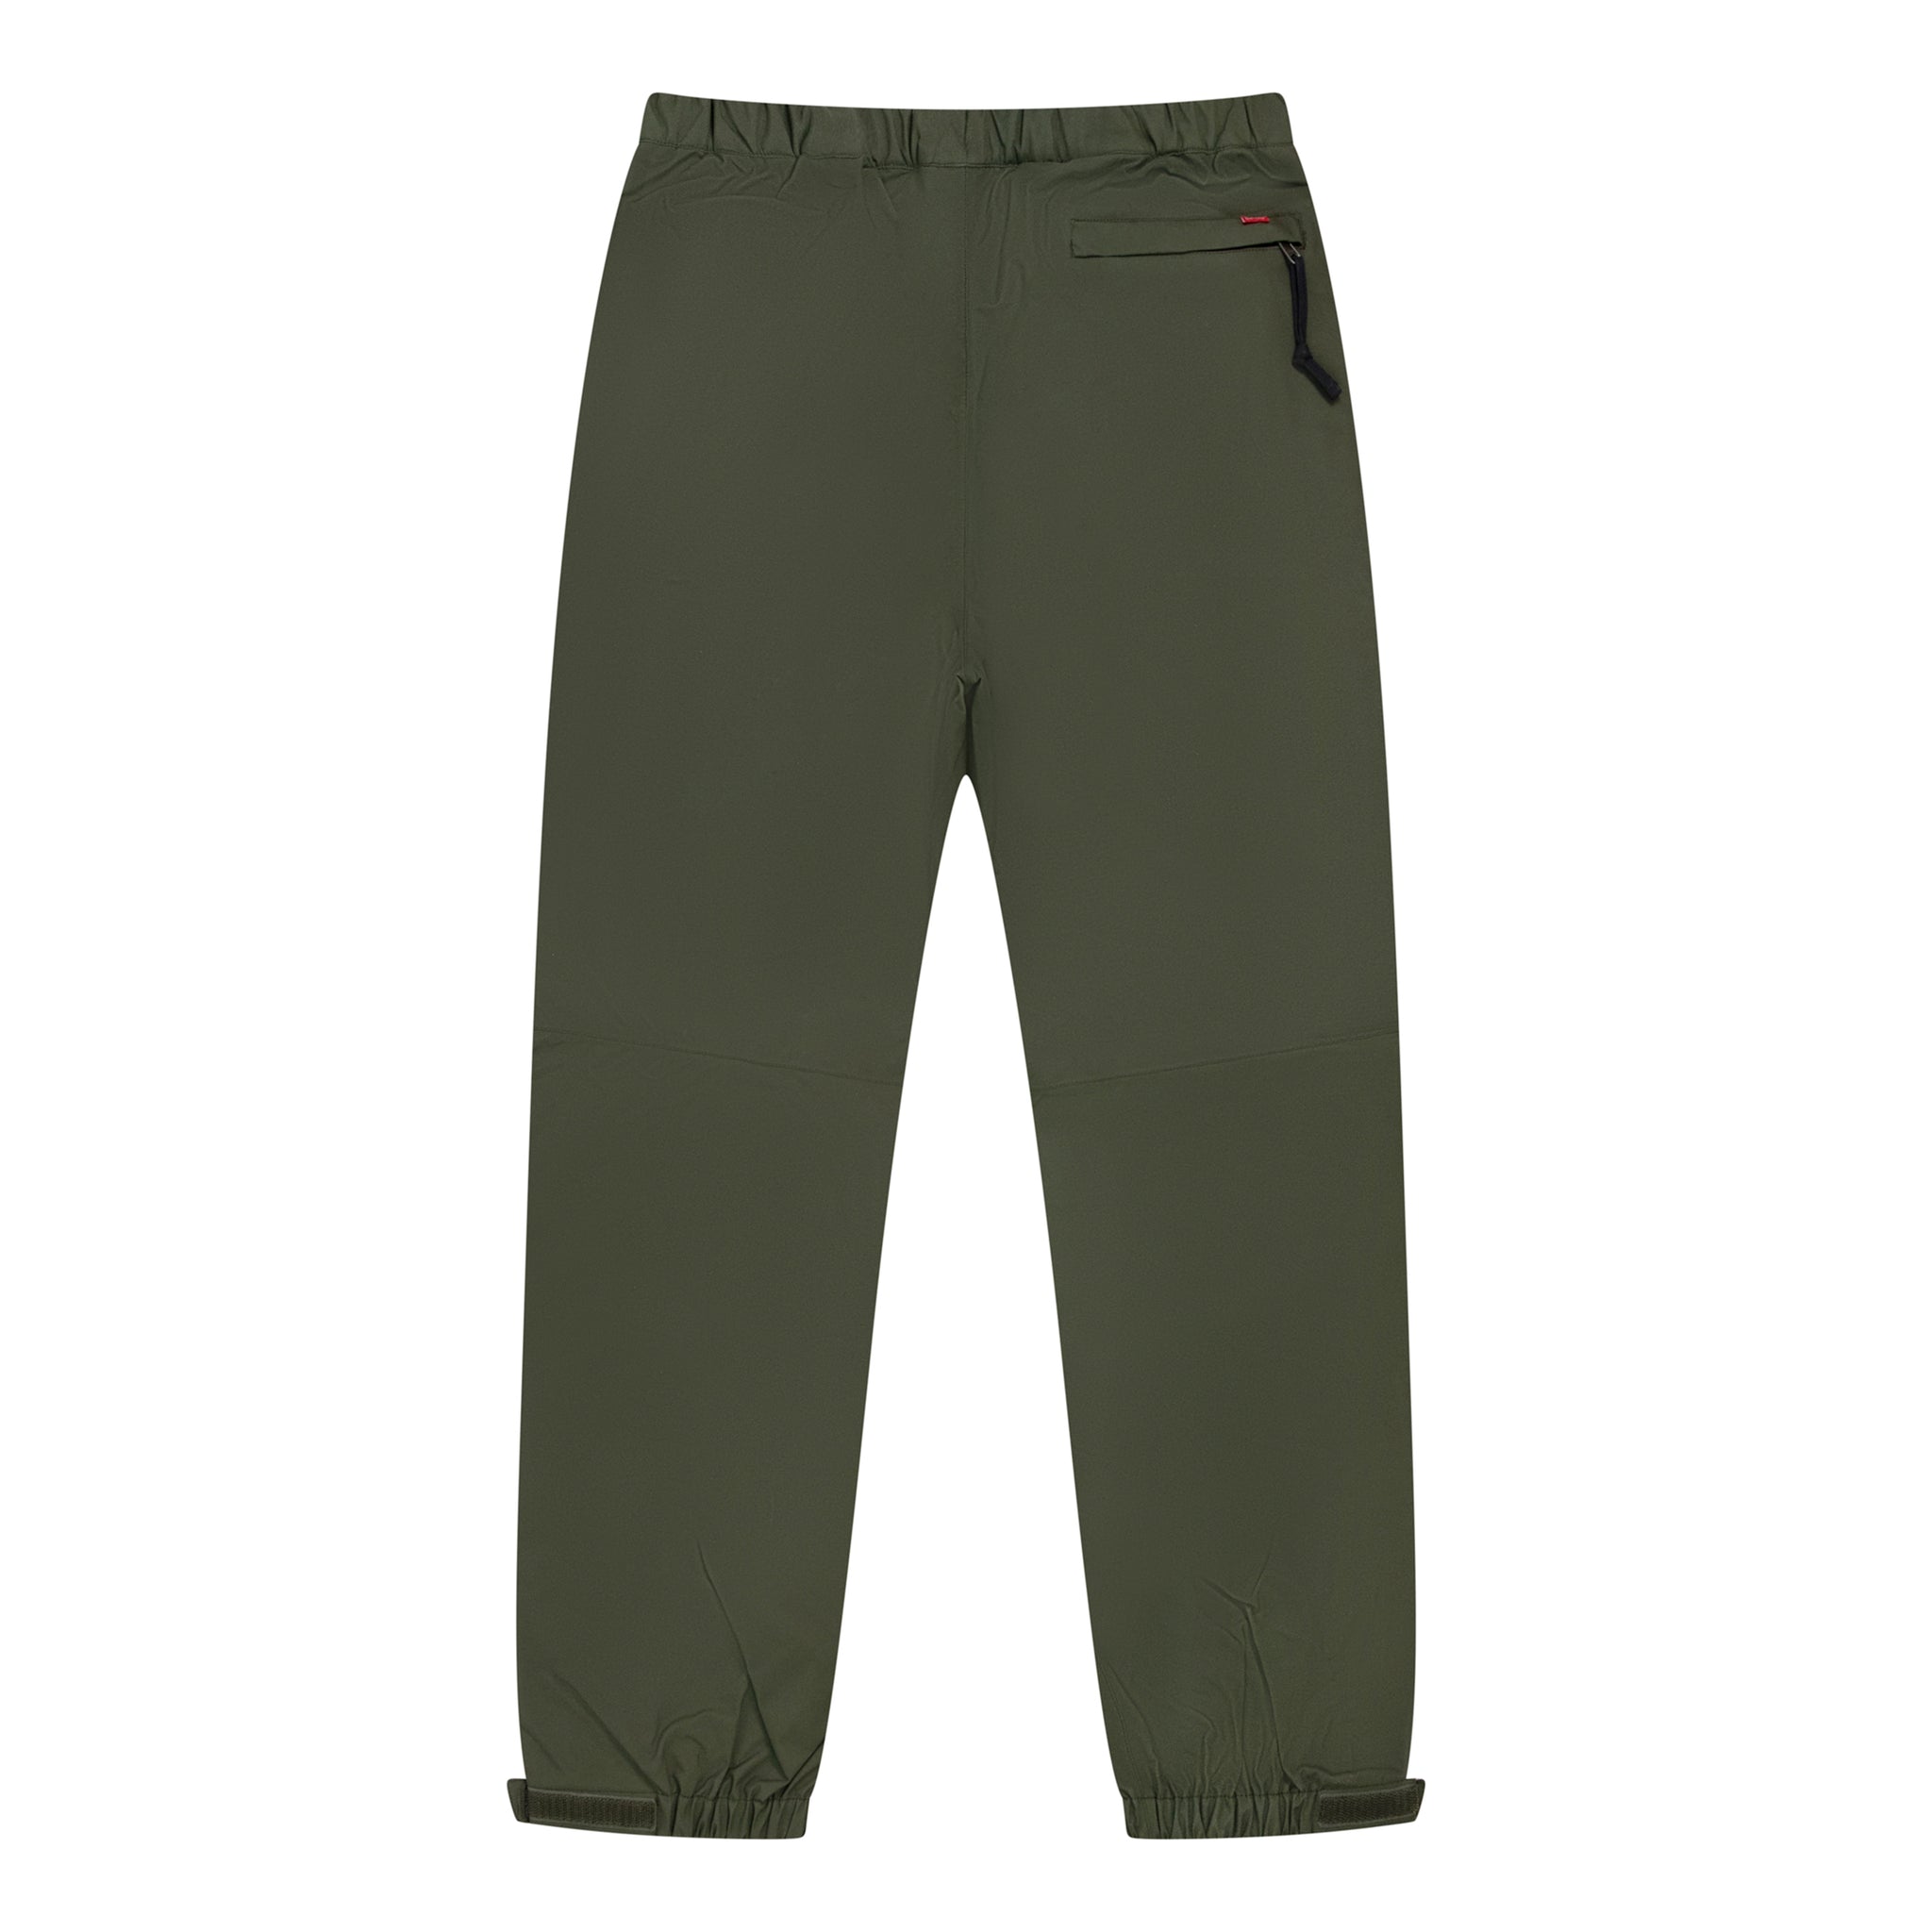 SUPREME THE NORTH FACE TRANS ANTARCTICA EXPEDITION PANT OLIVE